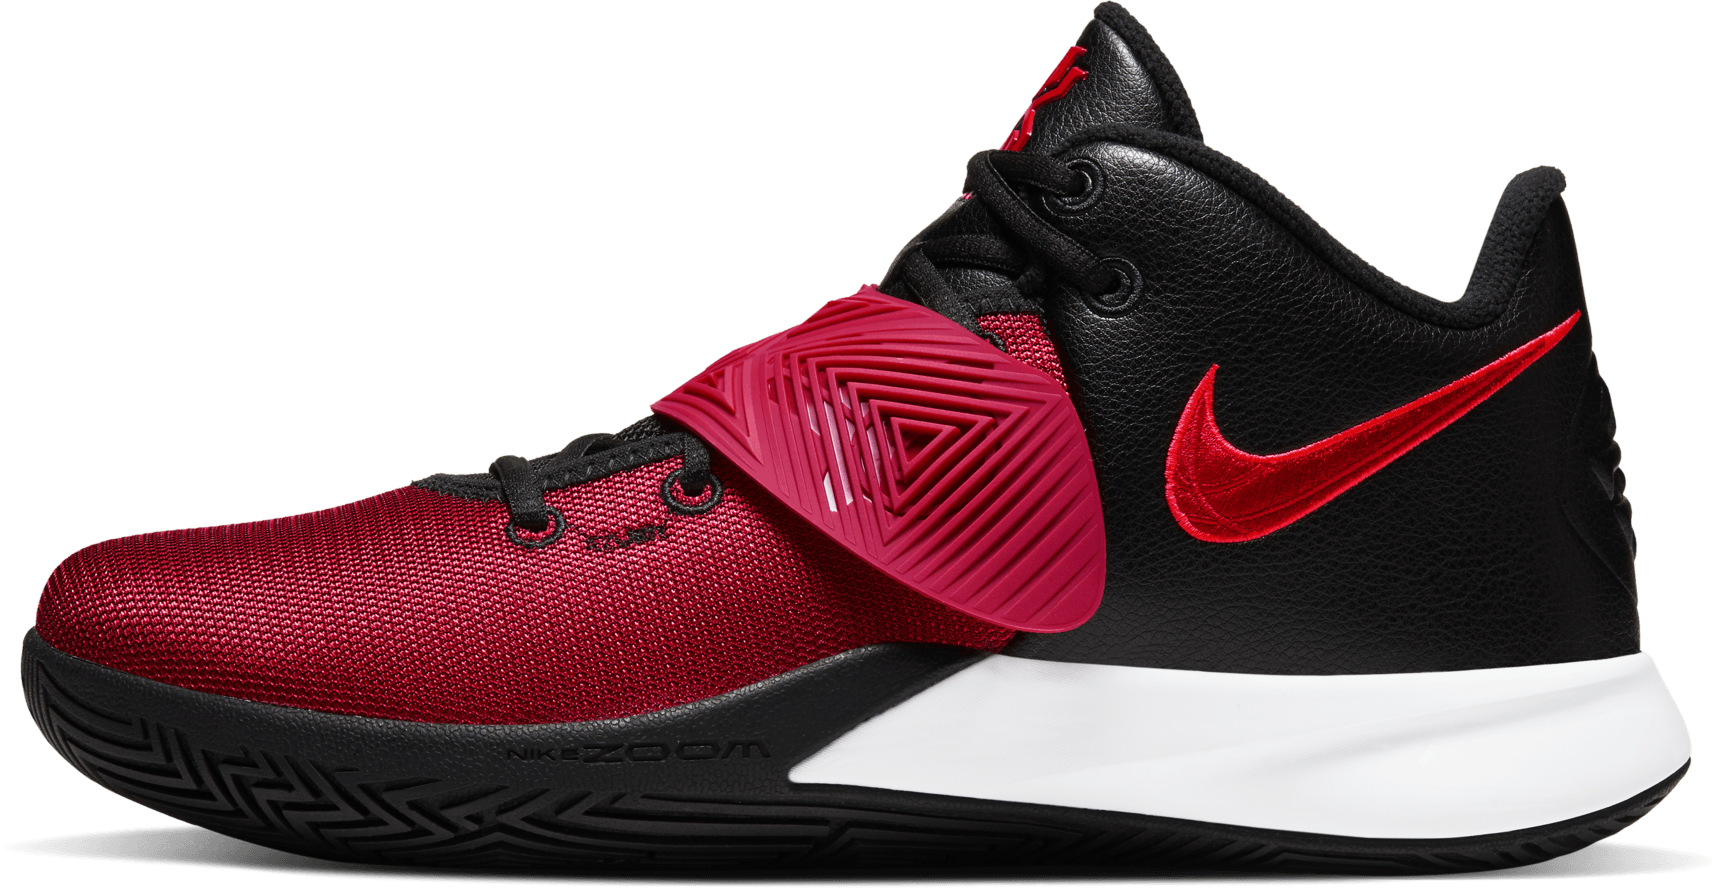 Nike Kyrie Flytrap 3 Performance Review